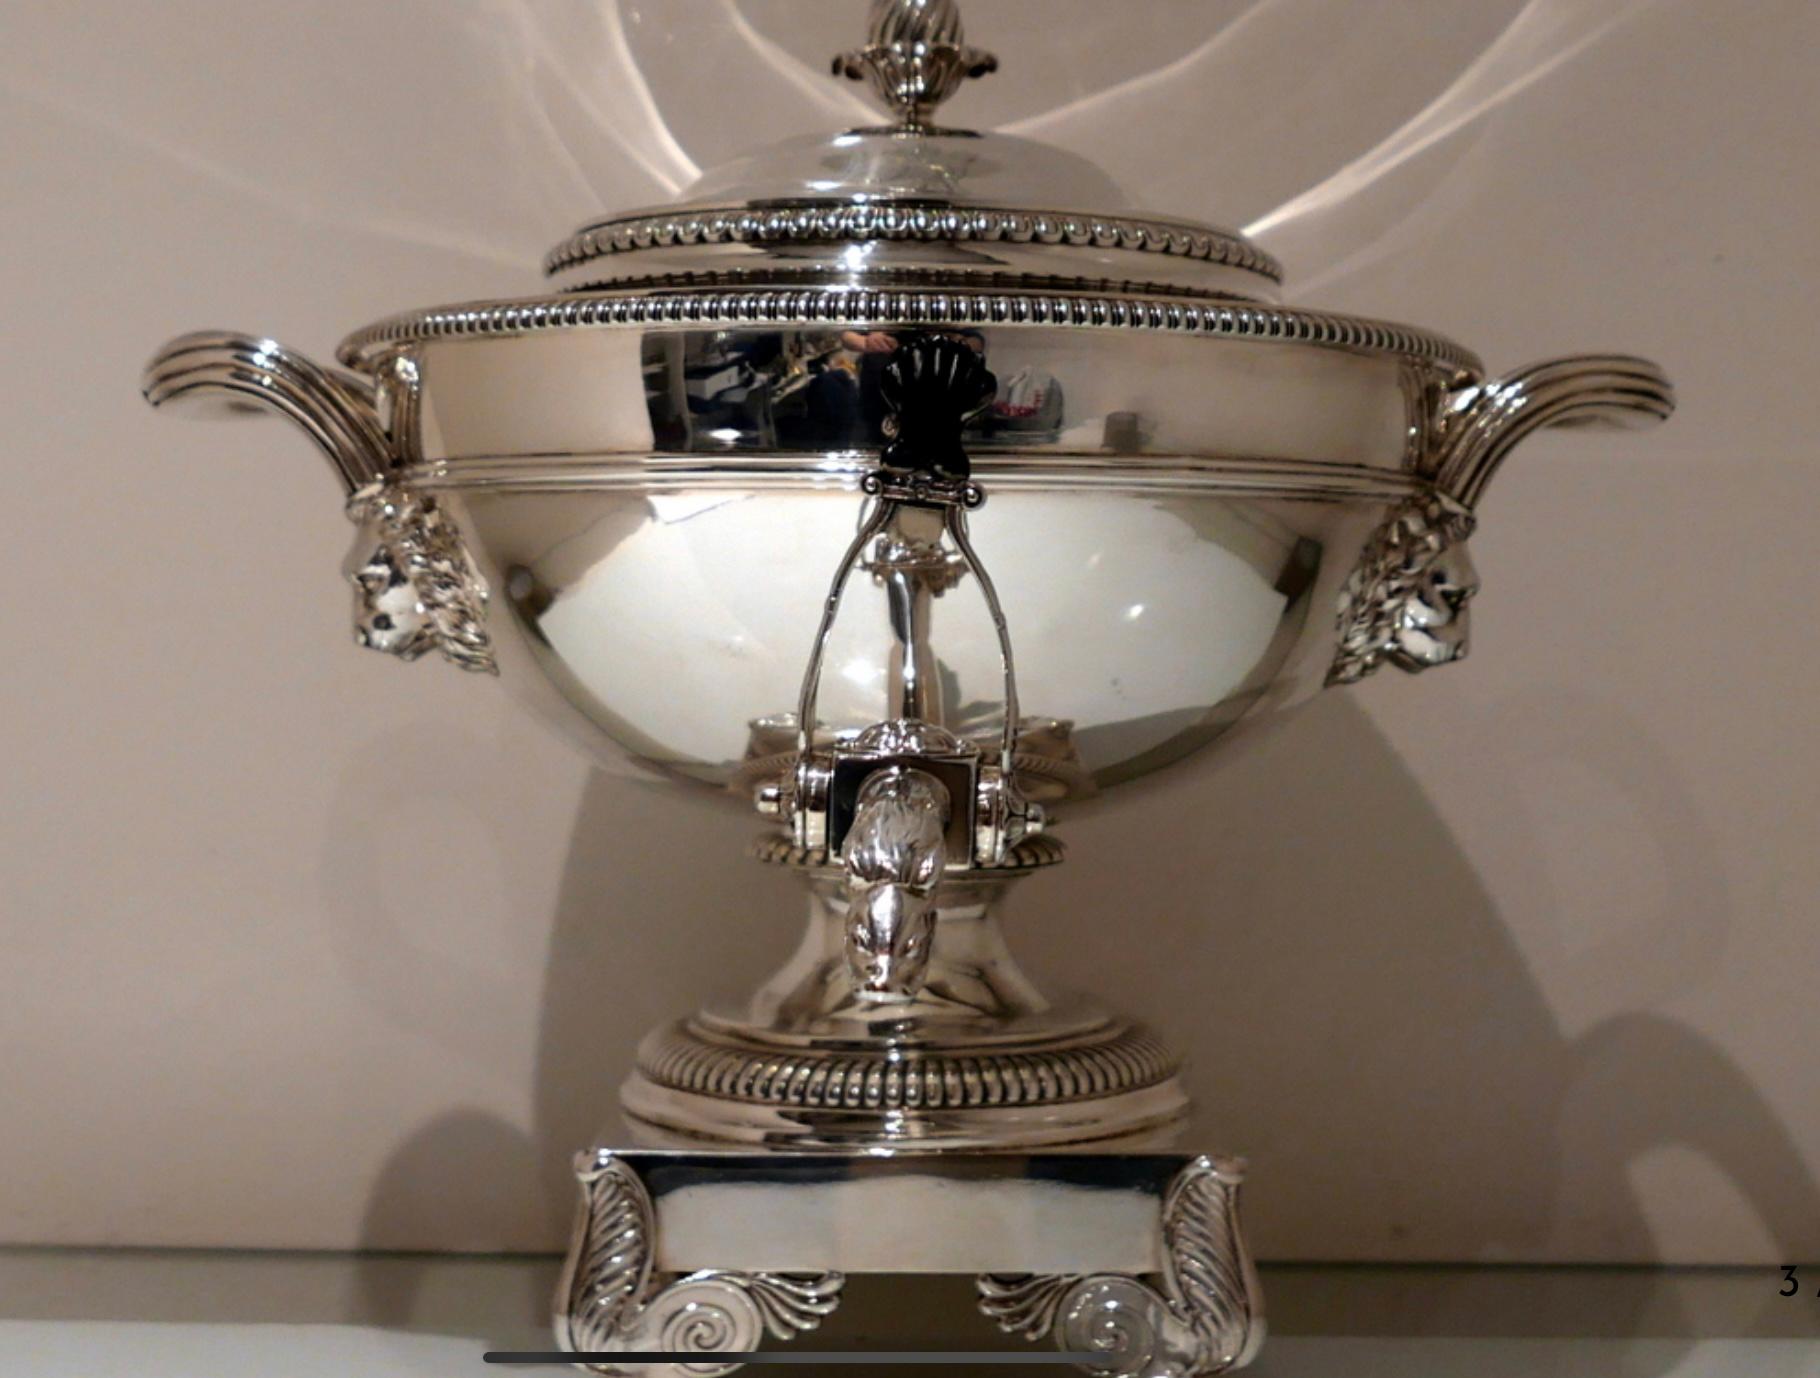 A truly stunning silver hemispherical tea urn decorated with gadroon borders for highlights.  The body has a stylish  upper girdled wire and a ‘serpent’ themed tap.  The lion mane handles and elegant ornate spreading pedestal foot complete a